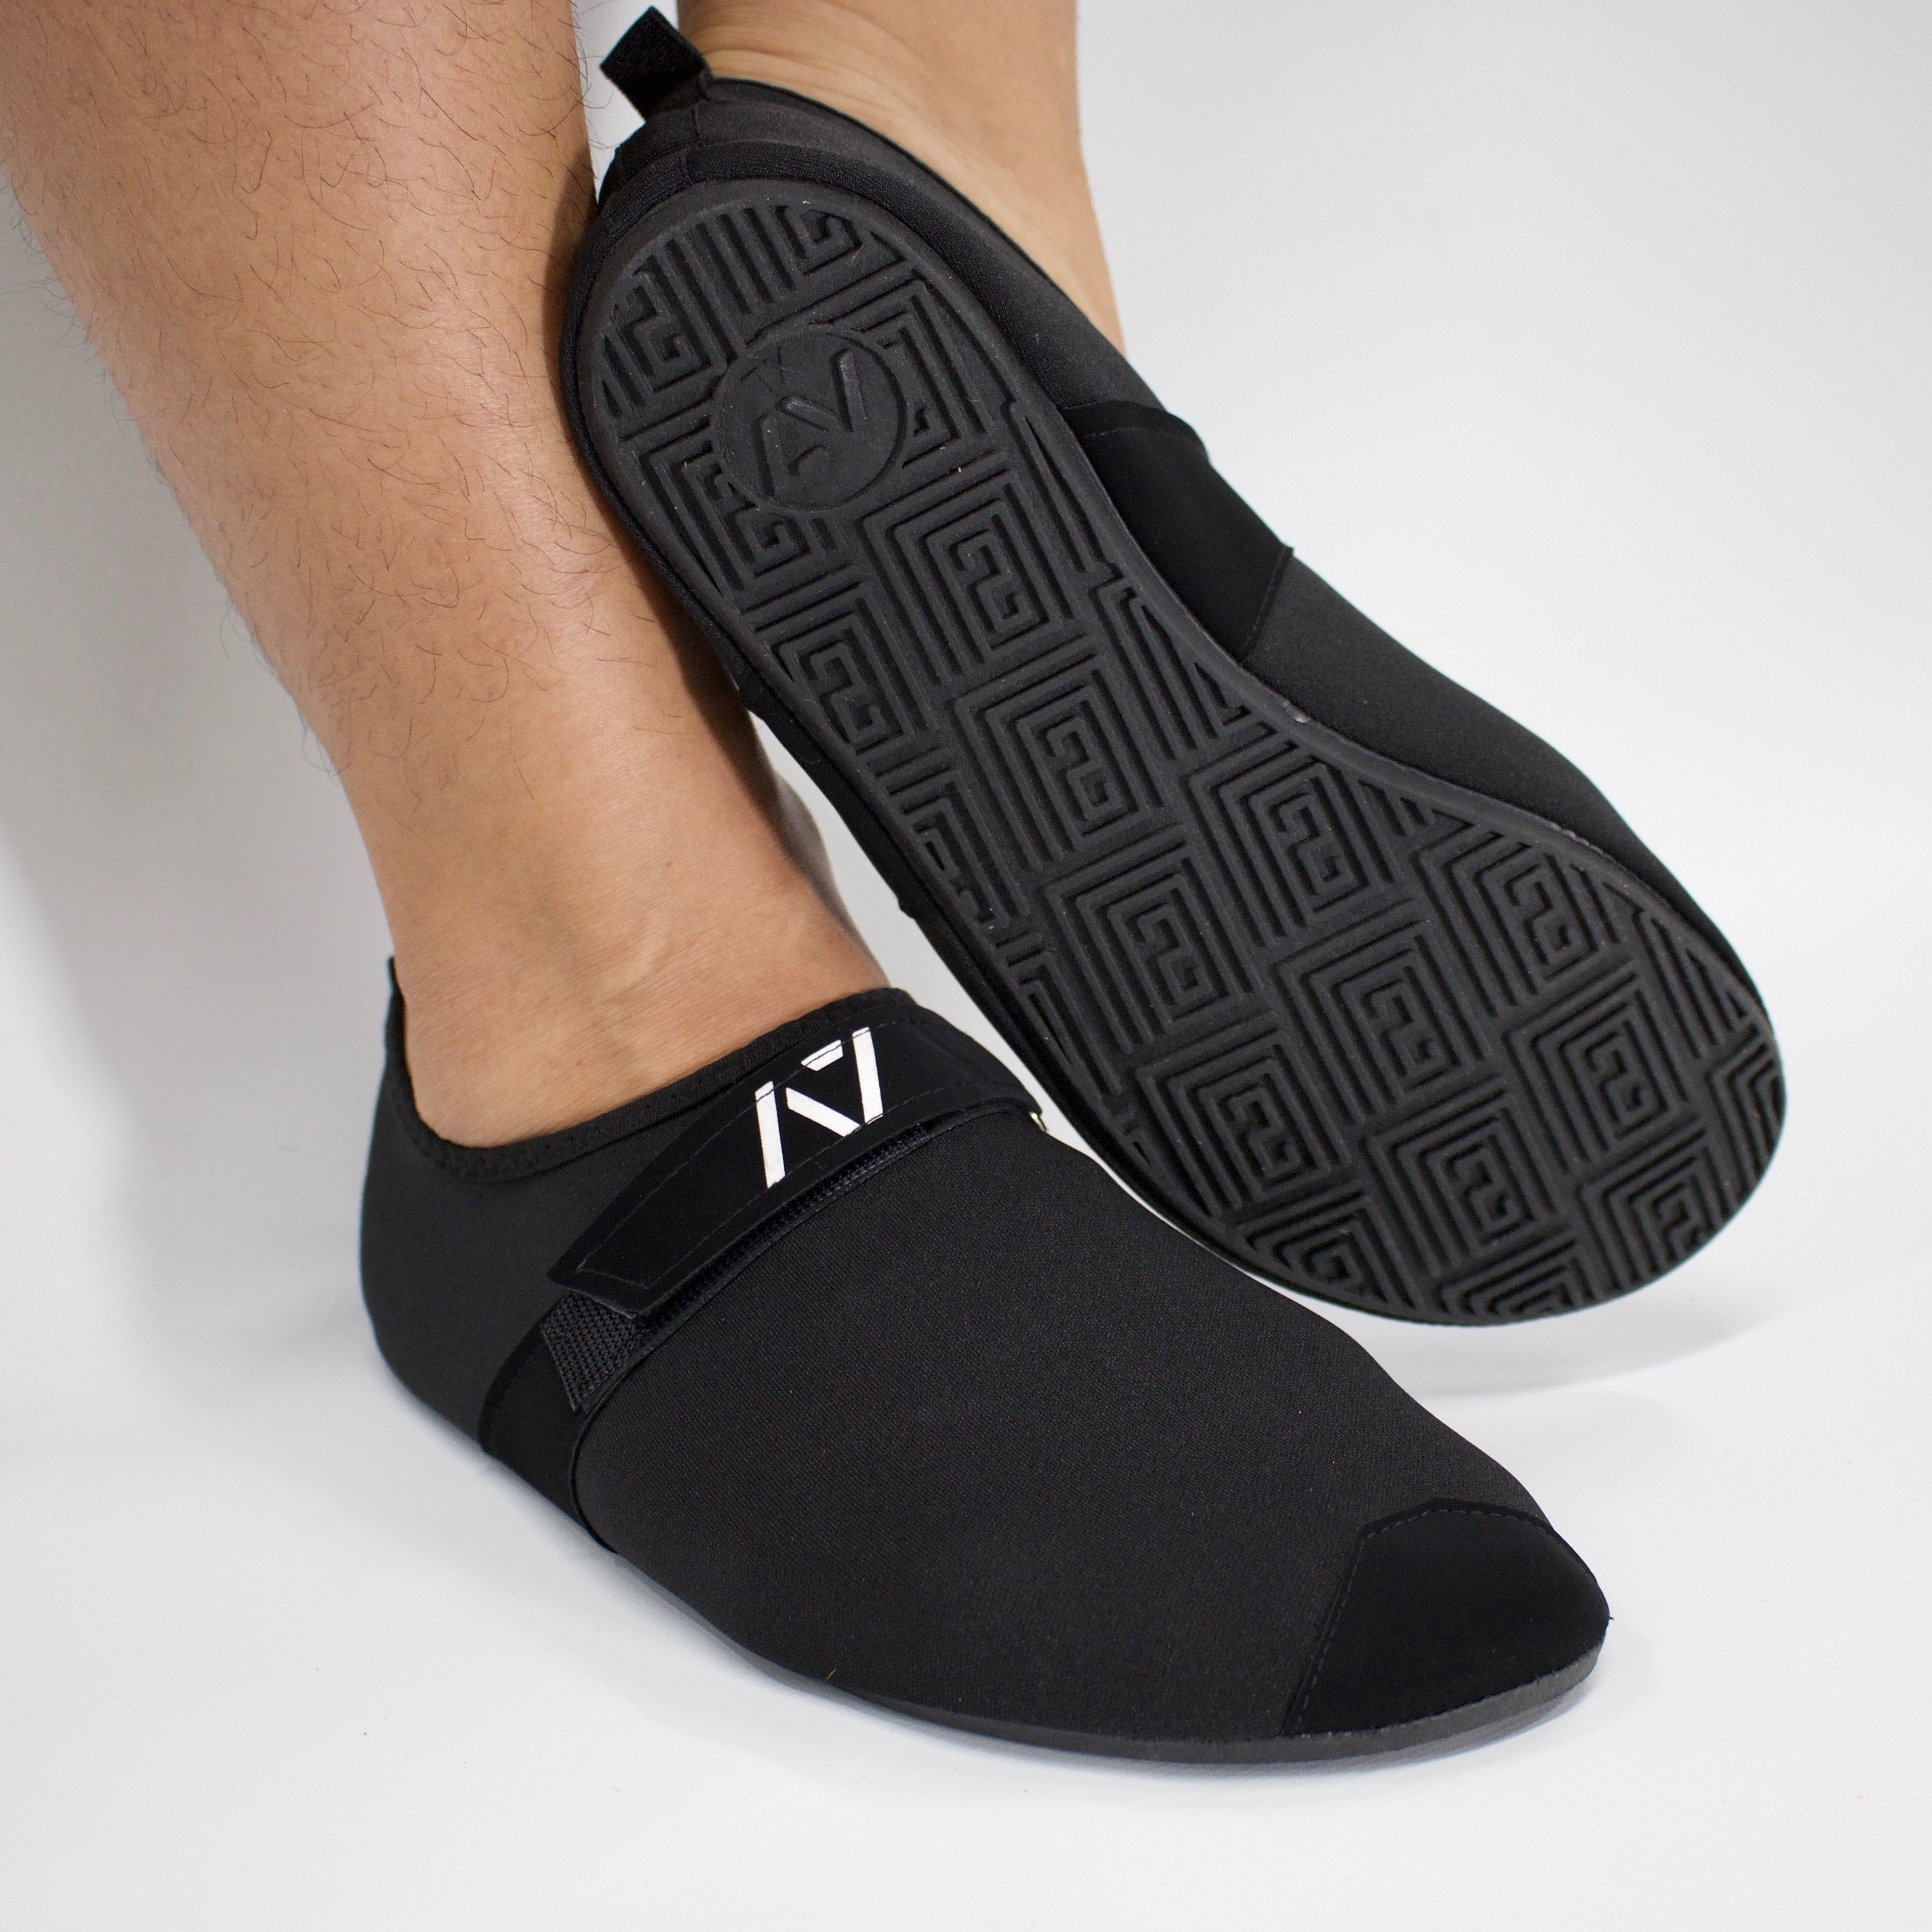 A7 Deadlift slippers easy to slip on and off and get close to the ground. IPF approved deadlift slippers. Deadlift slippers with a 3mm sole that can be used for squats, bench, deadlift or just lounging around the house. The best Powerlifting apparel and clothes for all your workouts, shipping to UK and Europe from A7 UK. Deadlift slippers. Soul Go slippers are the perfect IPF approved kit for IPF competitions. Available in UK and Europe including France, Italy, Germany, Sweden and Poland